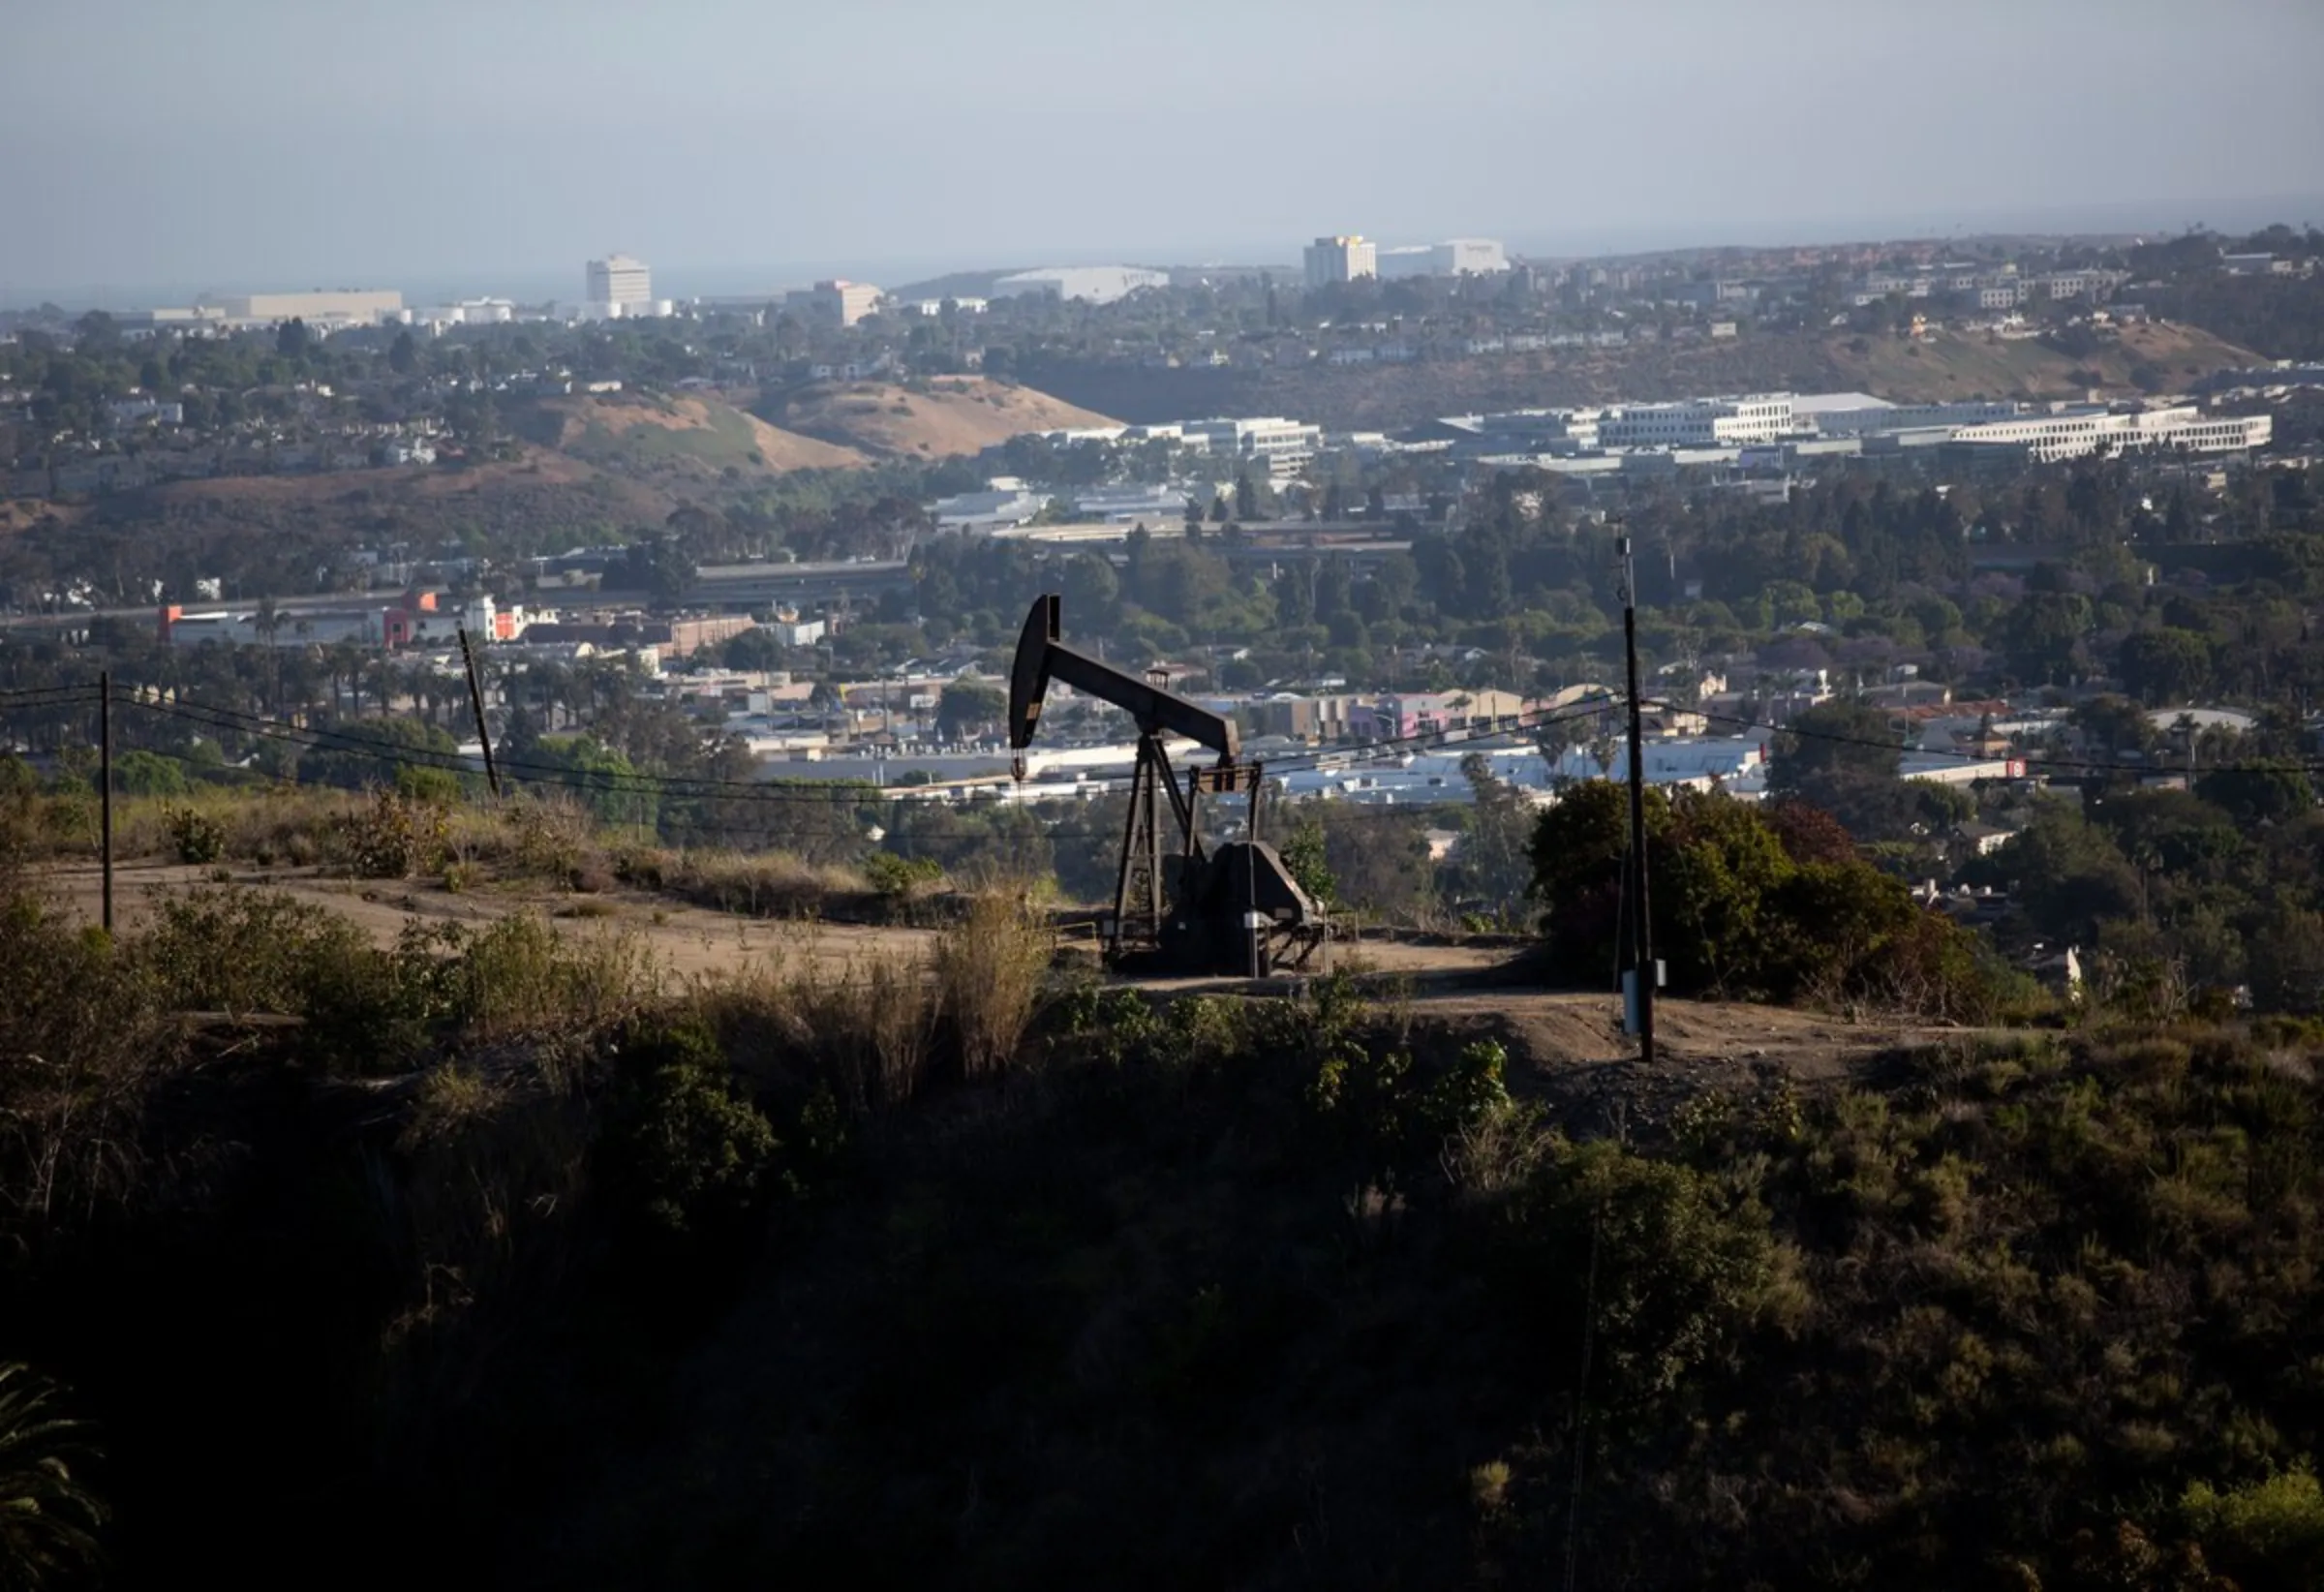 An oil pump stands in the Inglewood Oil Field in Culver City in Los Angeles County, California, May 23, 2021